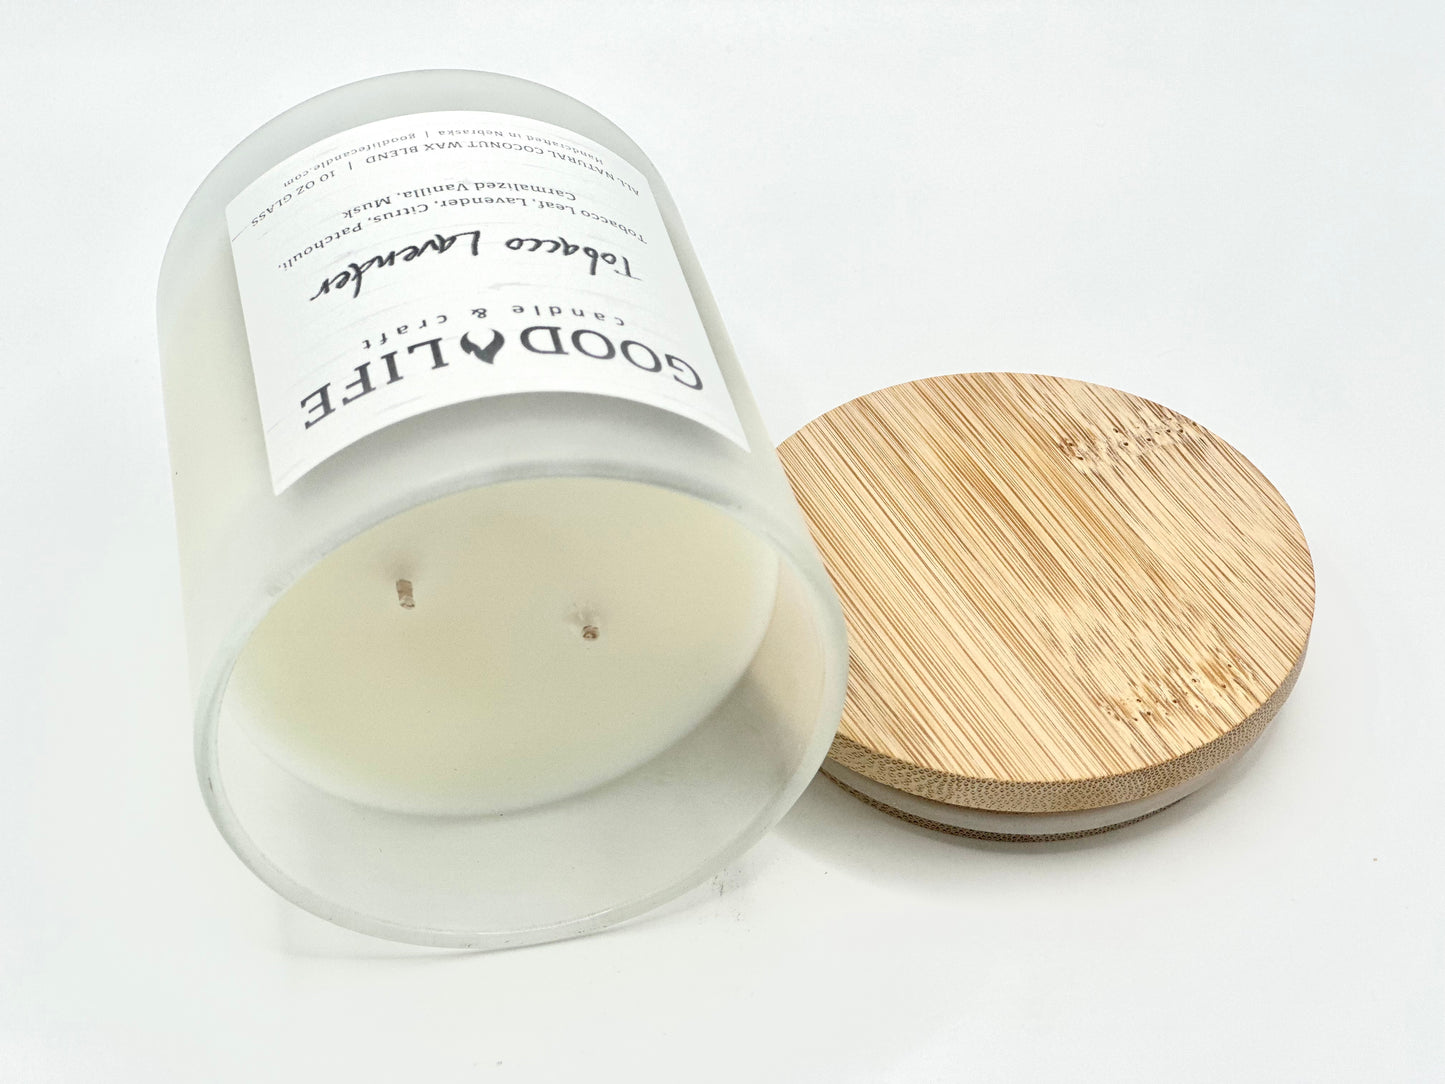 Tobacco Lavender Scented Candle